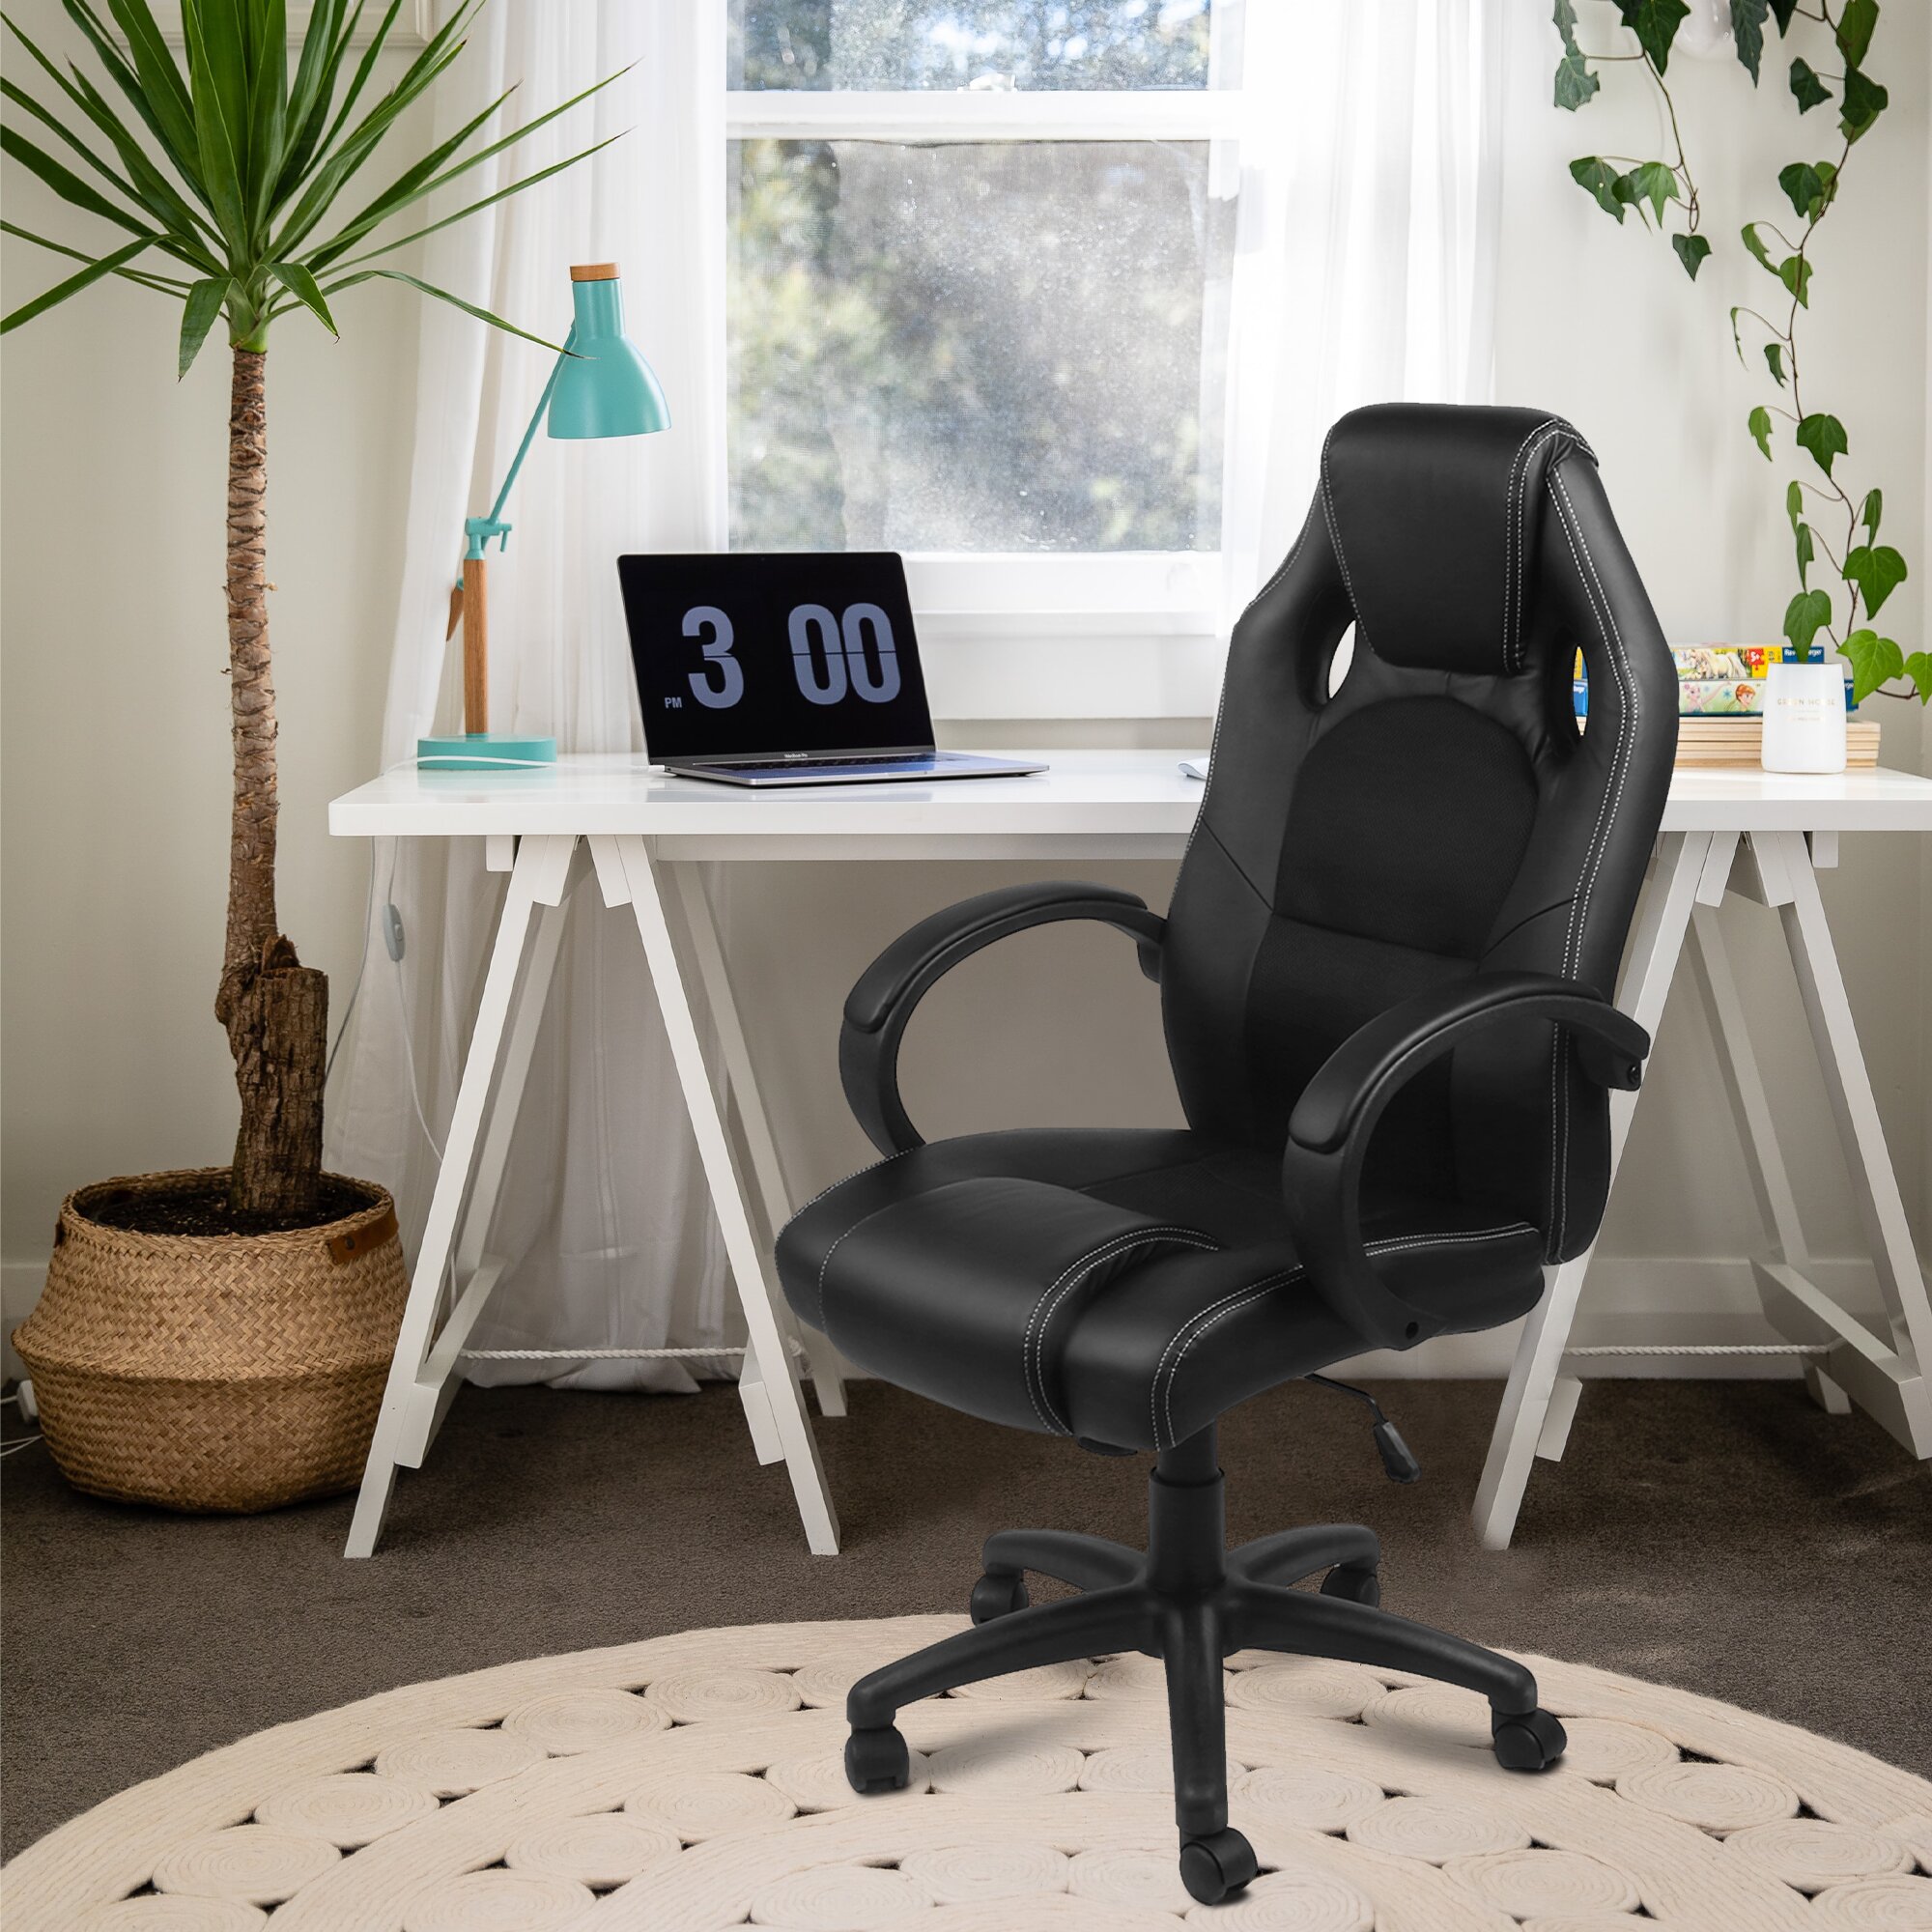 Ergonomic Gaming Computer Chair Swivel Recliner Office Chair Leather Desk Chairs 